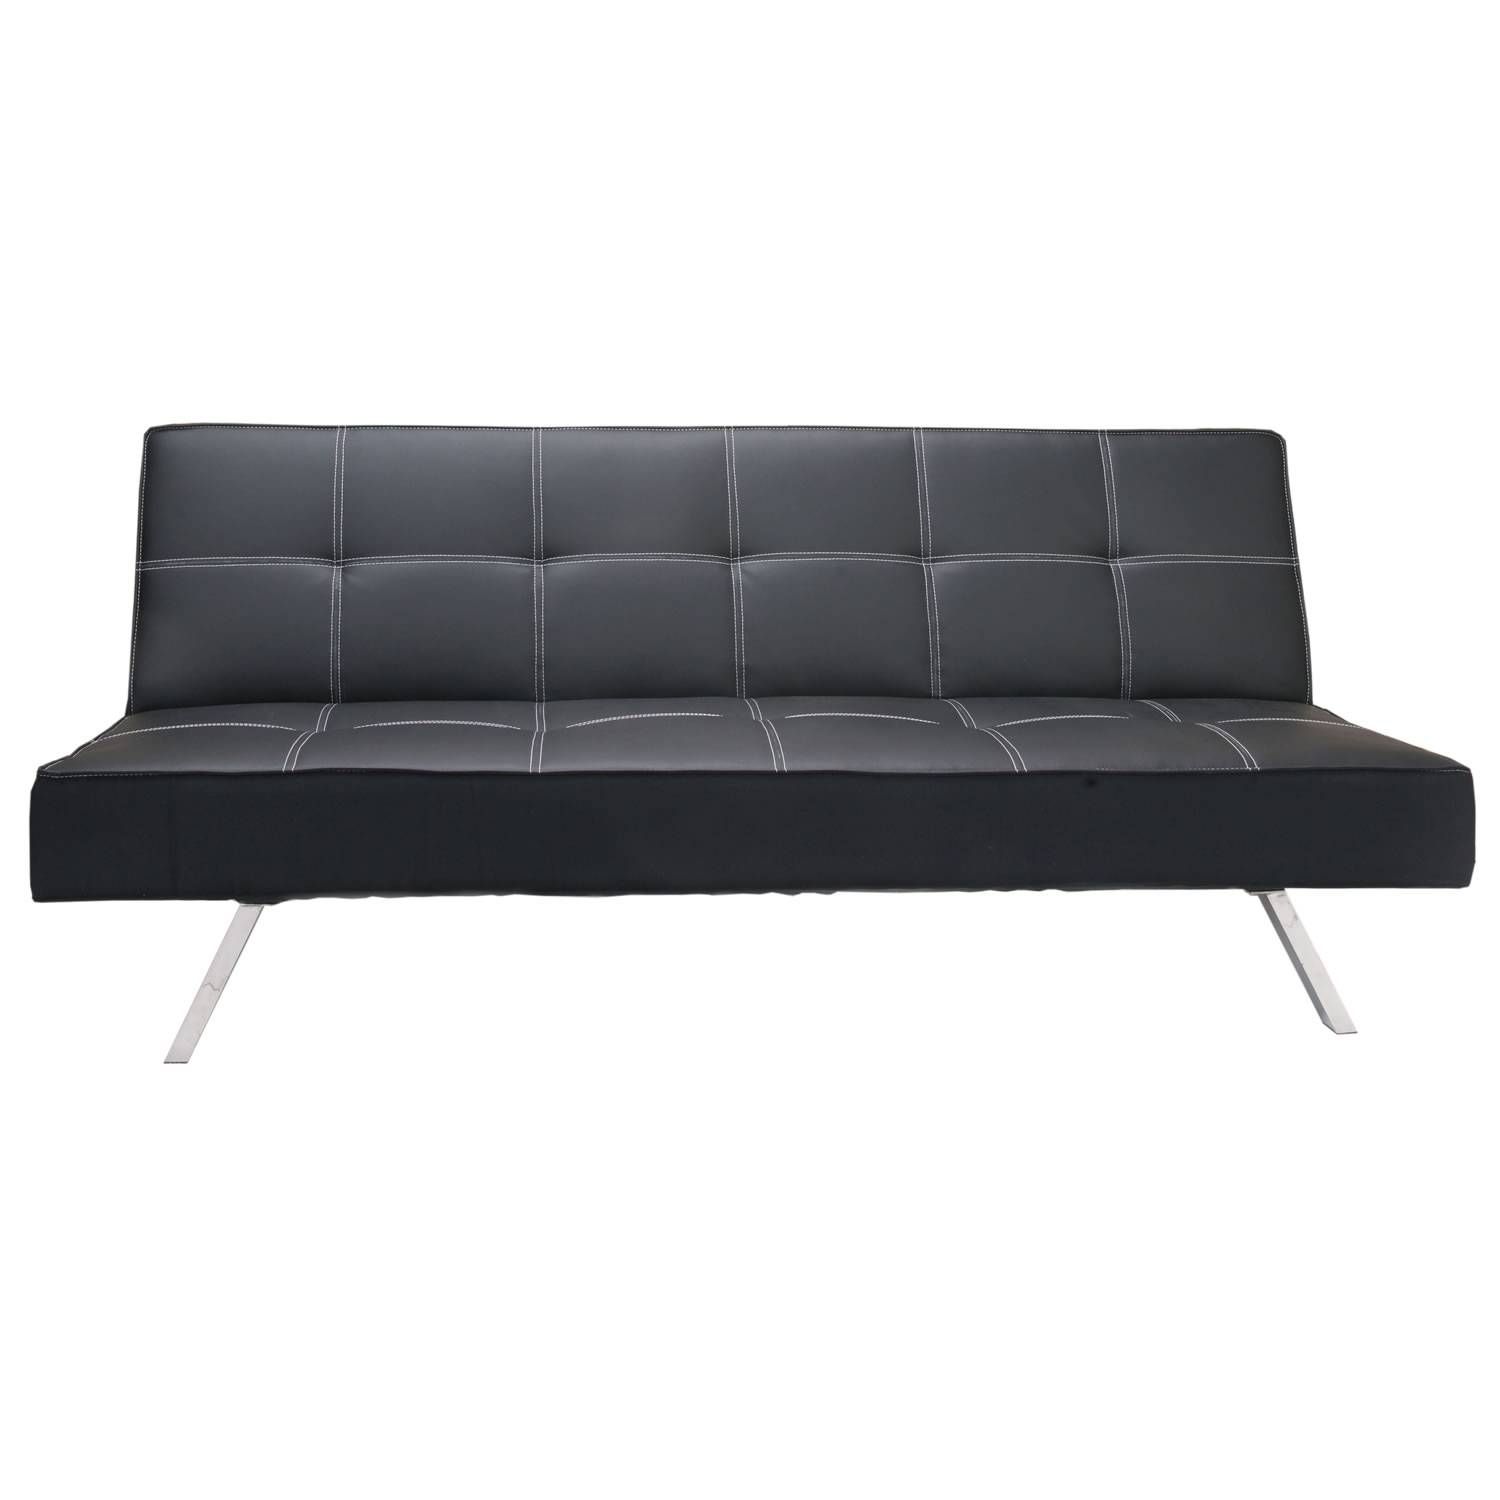 Brown Faux Leather Futon Sofa Bed | Centerfieldbar Throughout Faux Leather Futon Sofas (View 3 of 15)